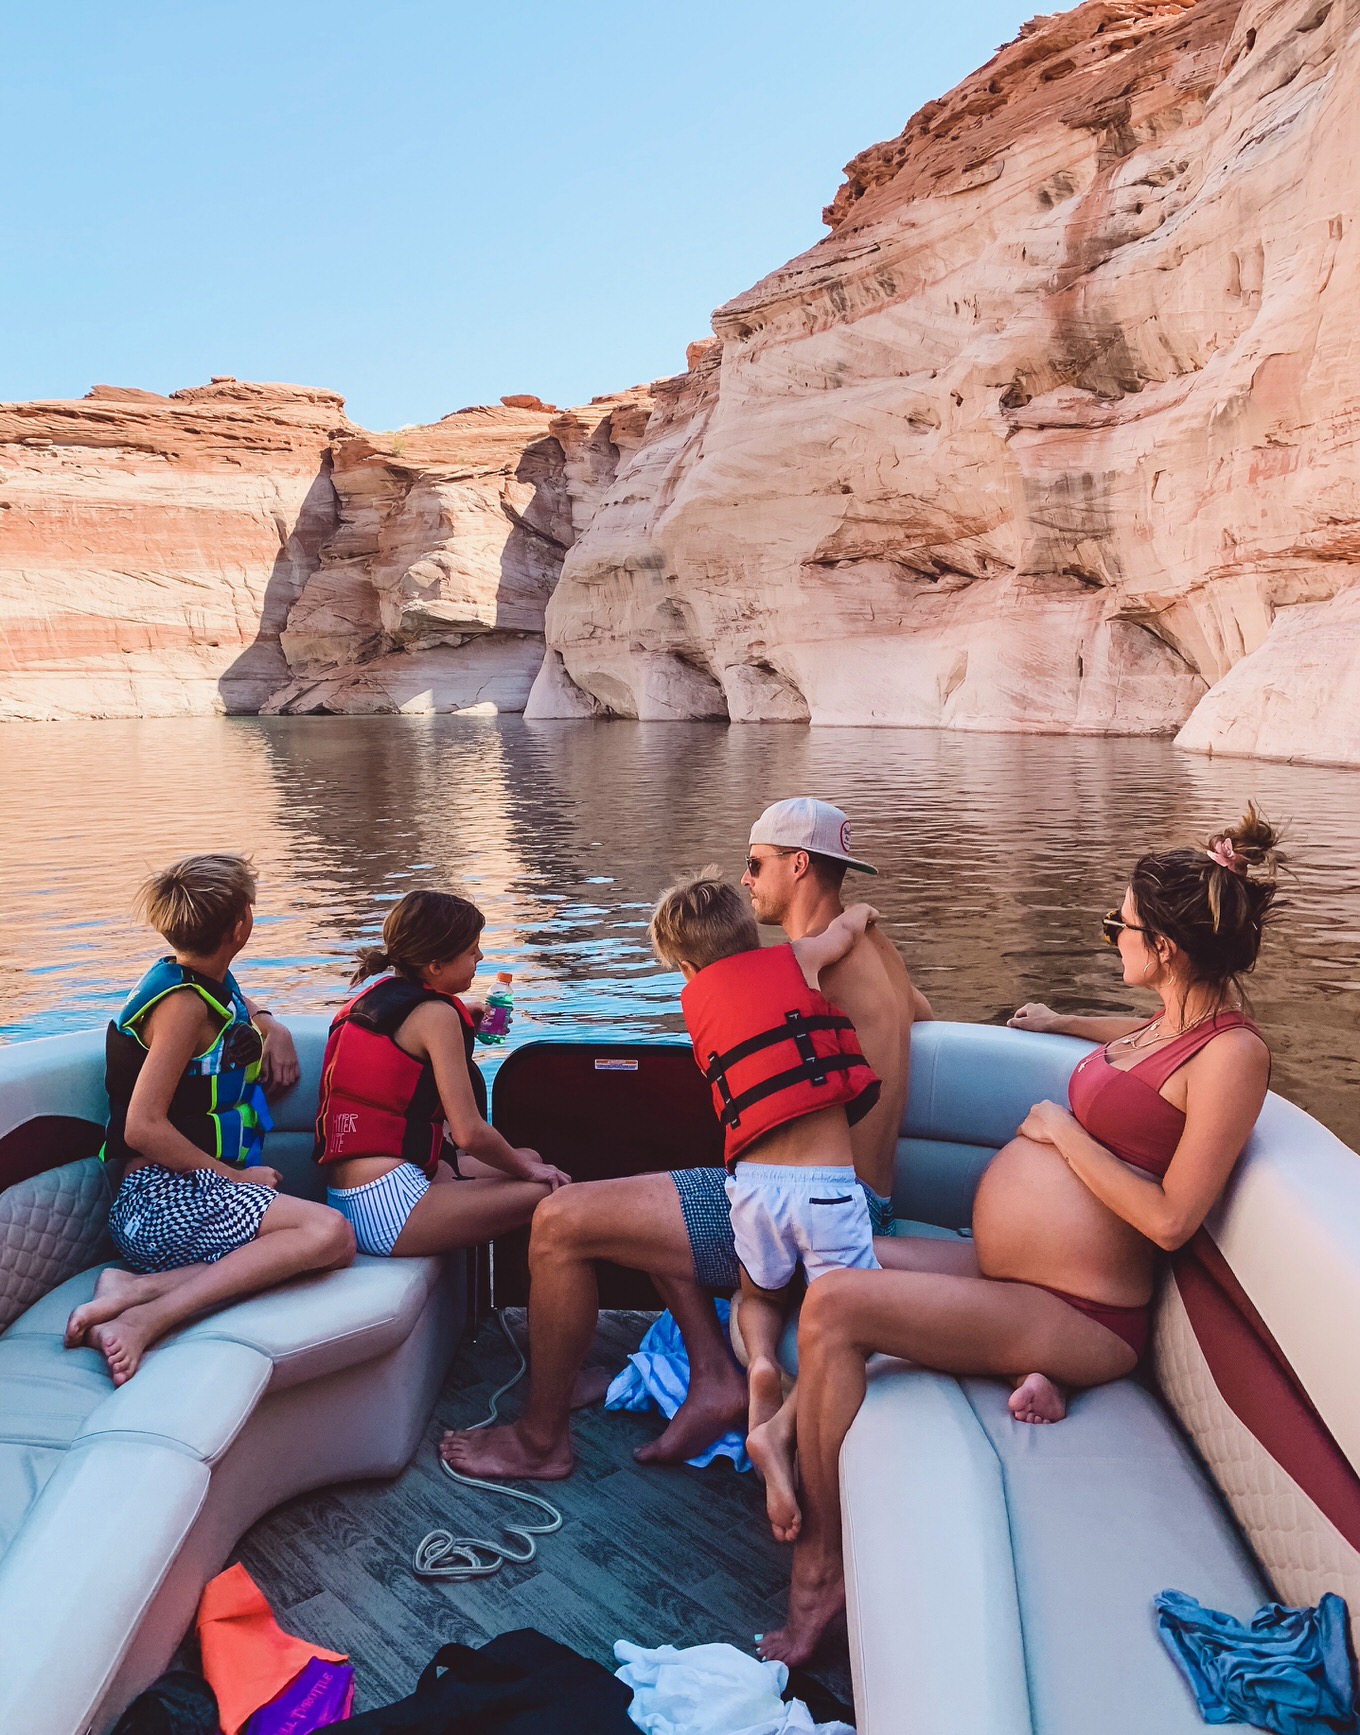 7 reasons to go to Lake powell